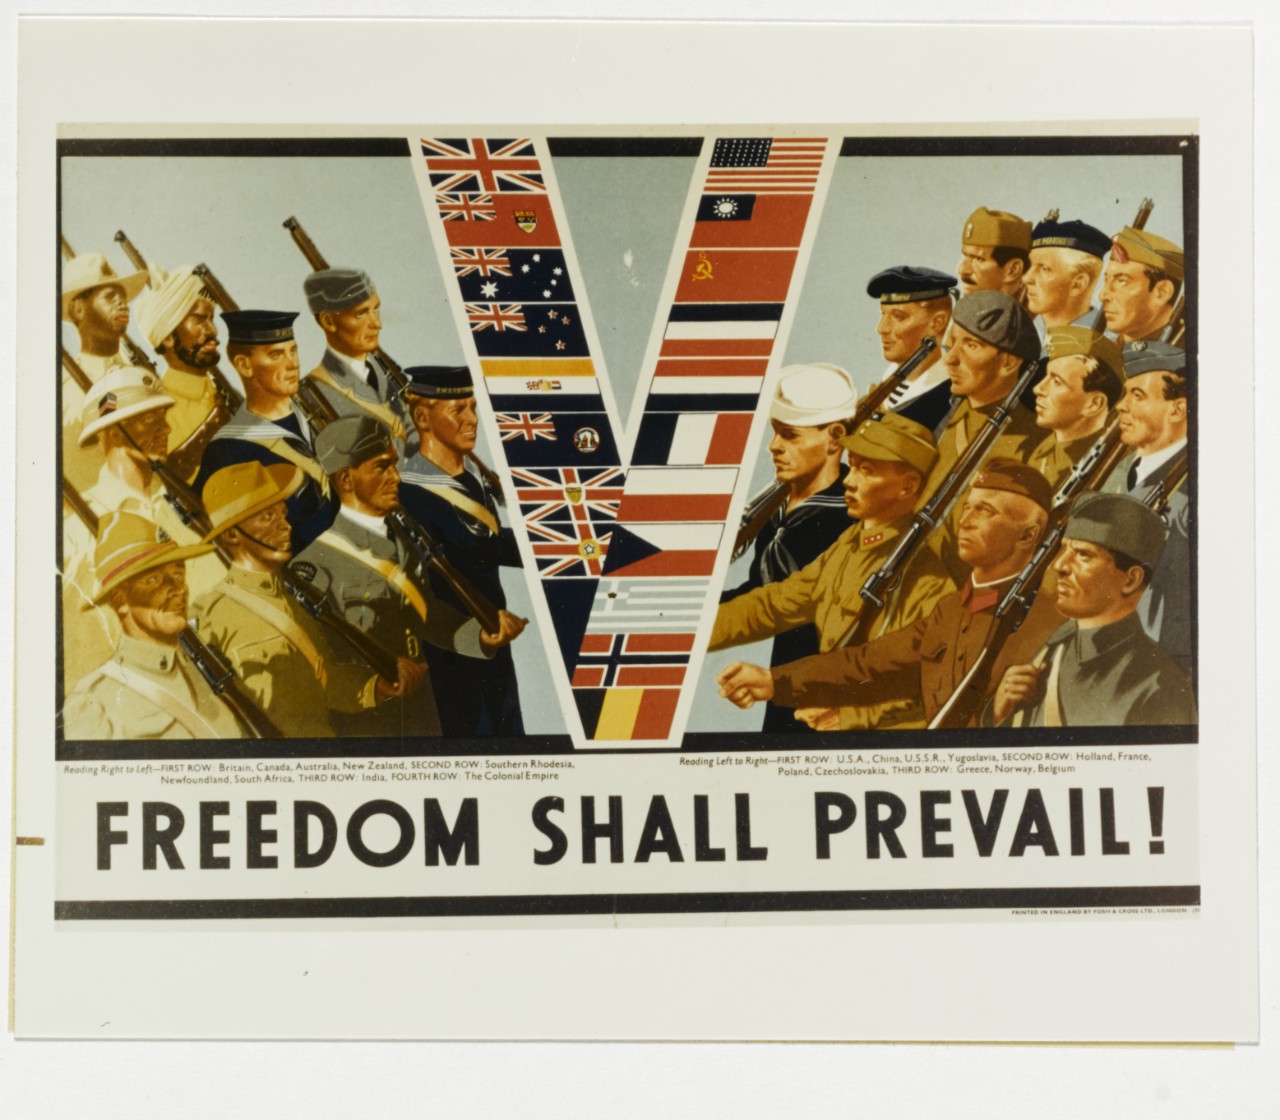 Poster:  "Freedom shall prevail"